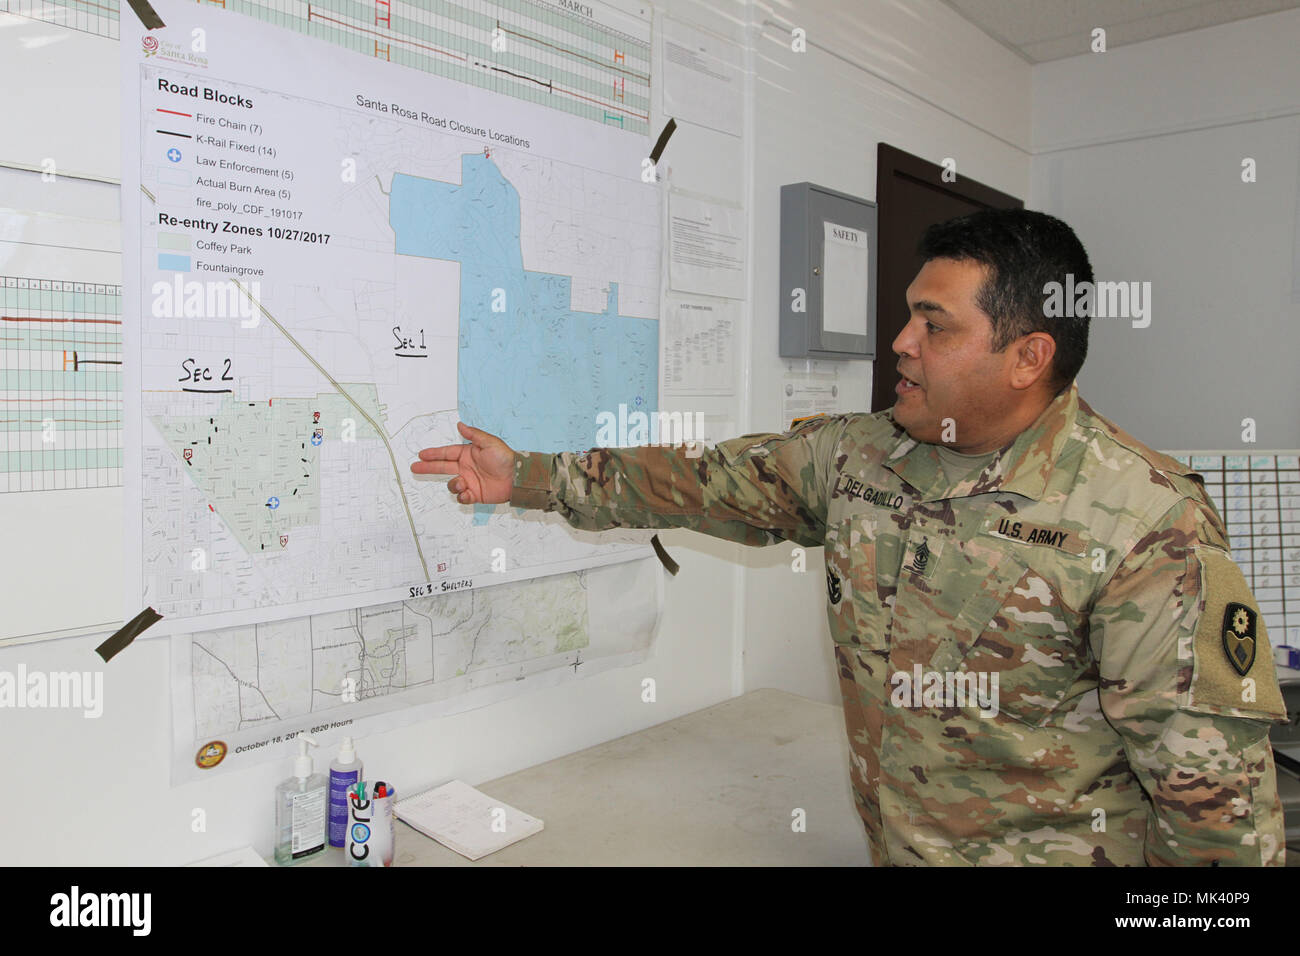 First Sgt. Antonio M. Delgadillo, first sergeant for the 149th CBRN Company, California Army National Guard, maps out the operations plan for checkpoints and road closures Nov. 1 at Santa Rosa, California, as CalGuard continues recovery efforts following the devastating Northern California wildfires. (Army National Guard photo by Staff Sgt Eddie Siguenza) Stock Photo